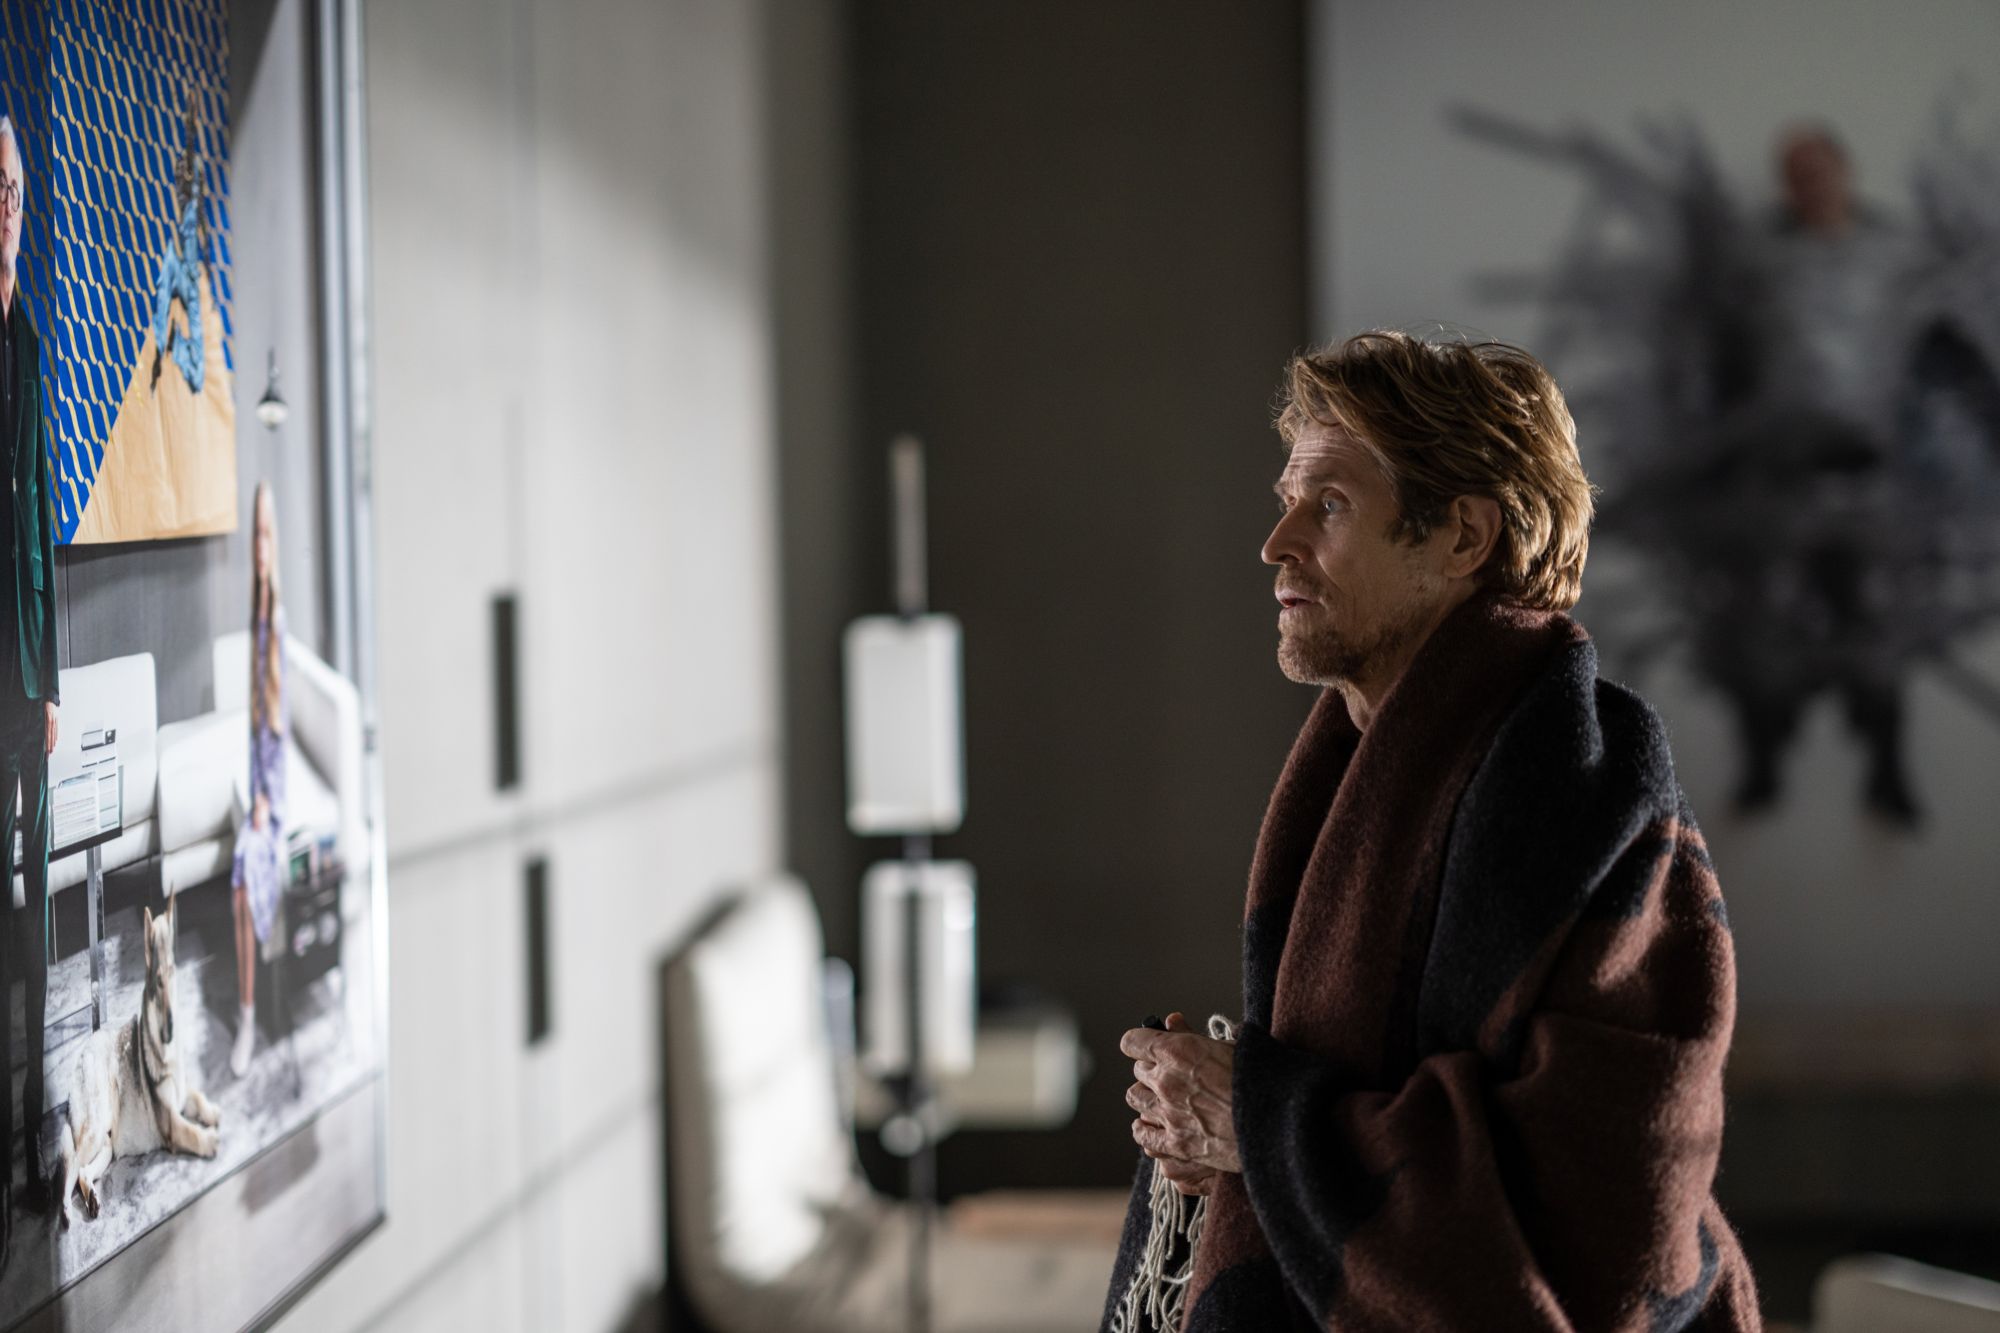 'Inside' Willem Dafoe as Nemo looking at a piece of art on the wall wrapped in a blanket.